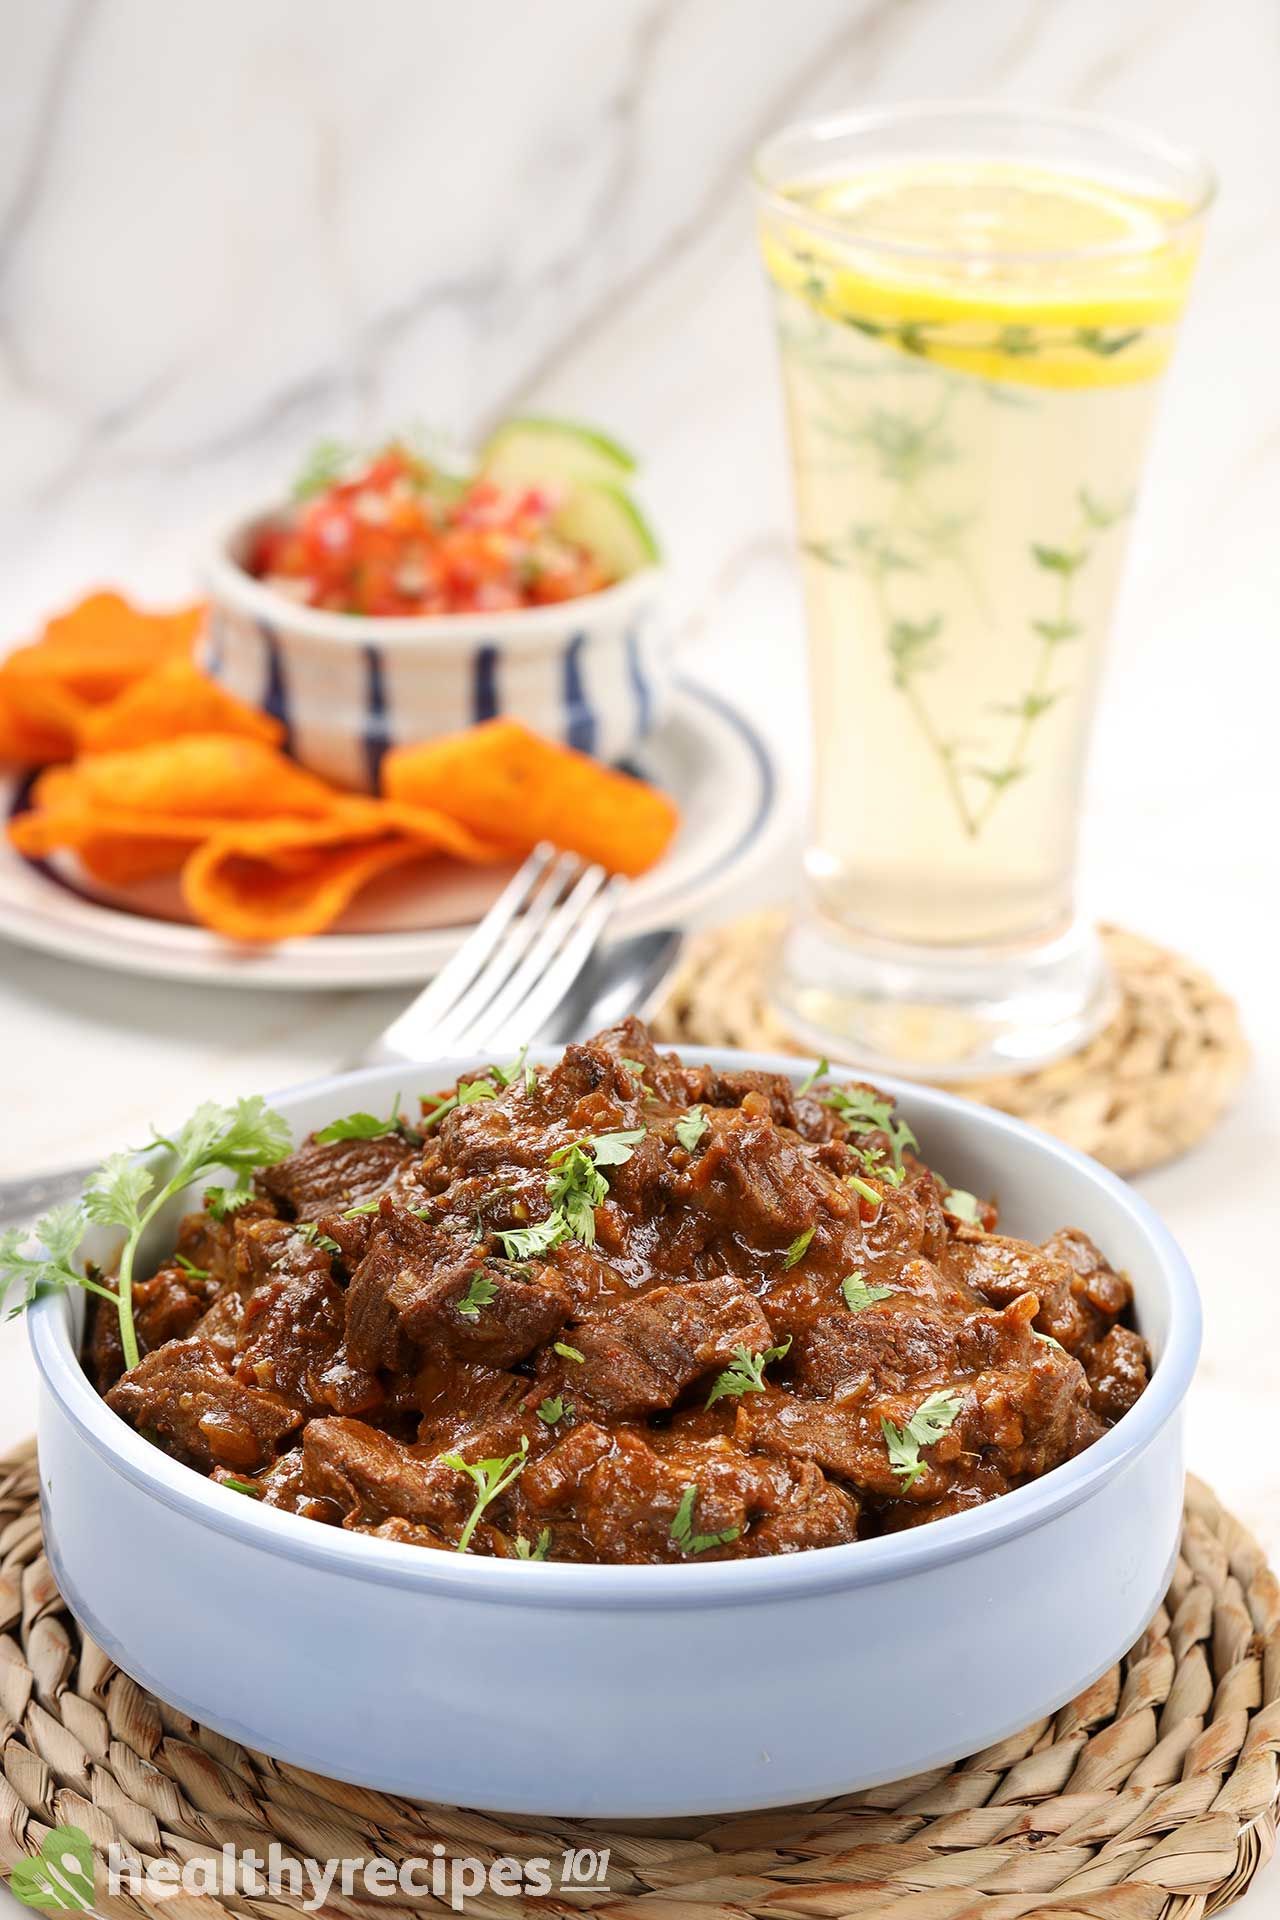 What to Serve With Beef Vindaloo